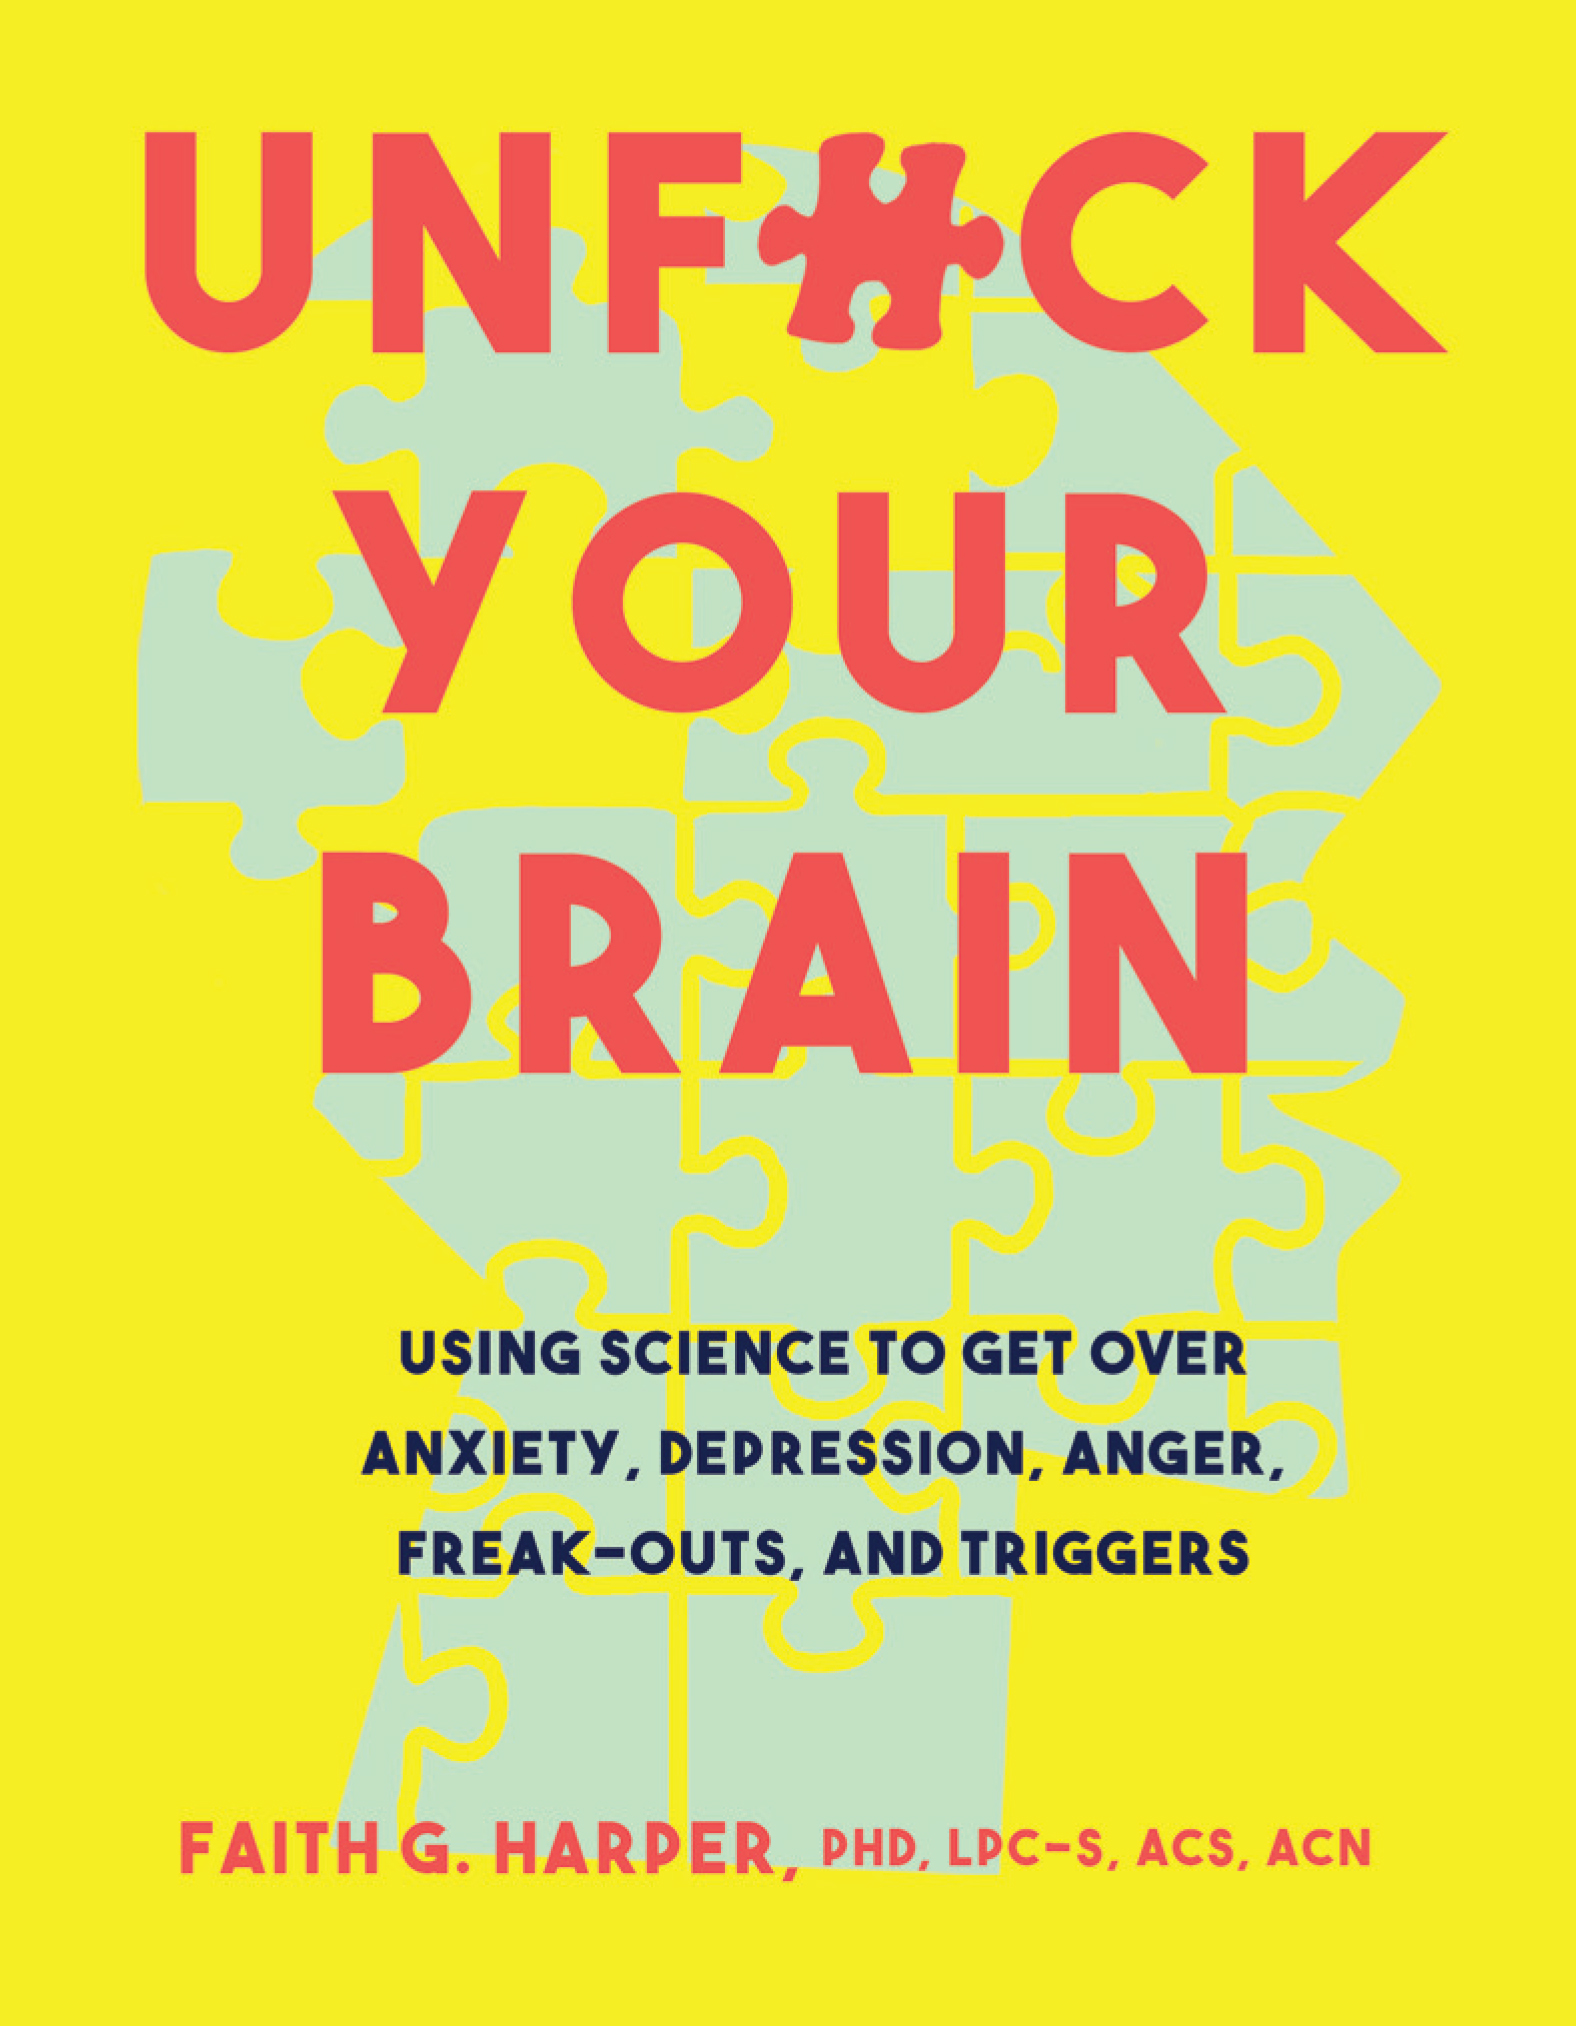 This image is the cover for the book Unfuck Your Brain